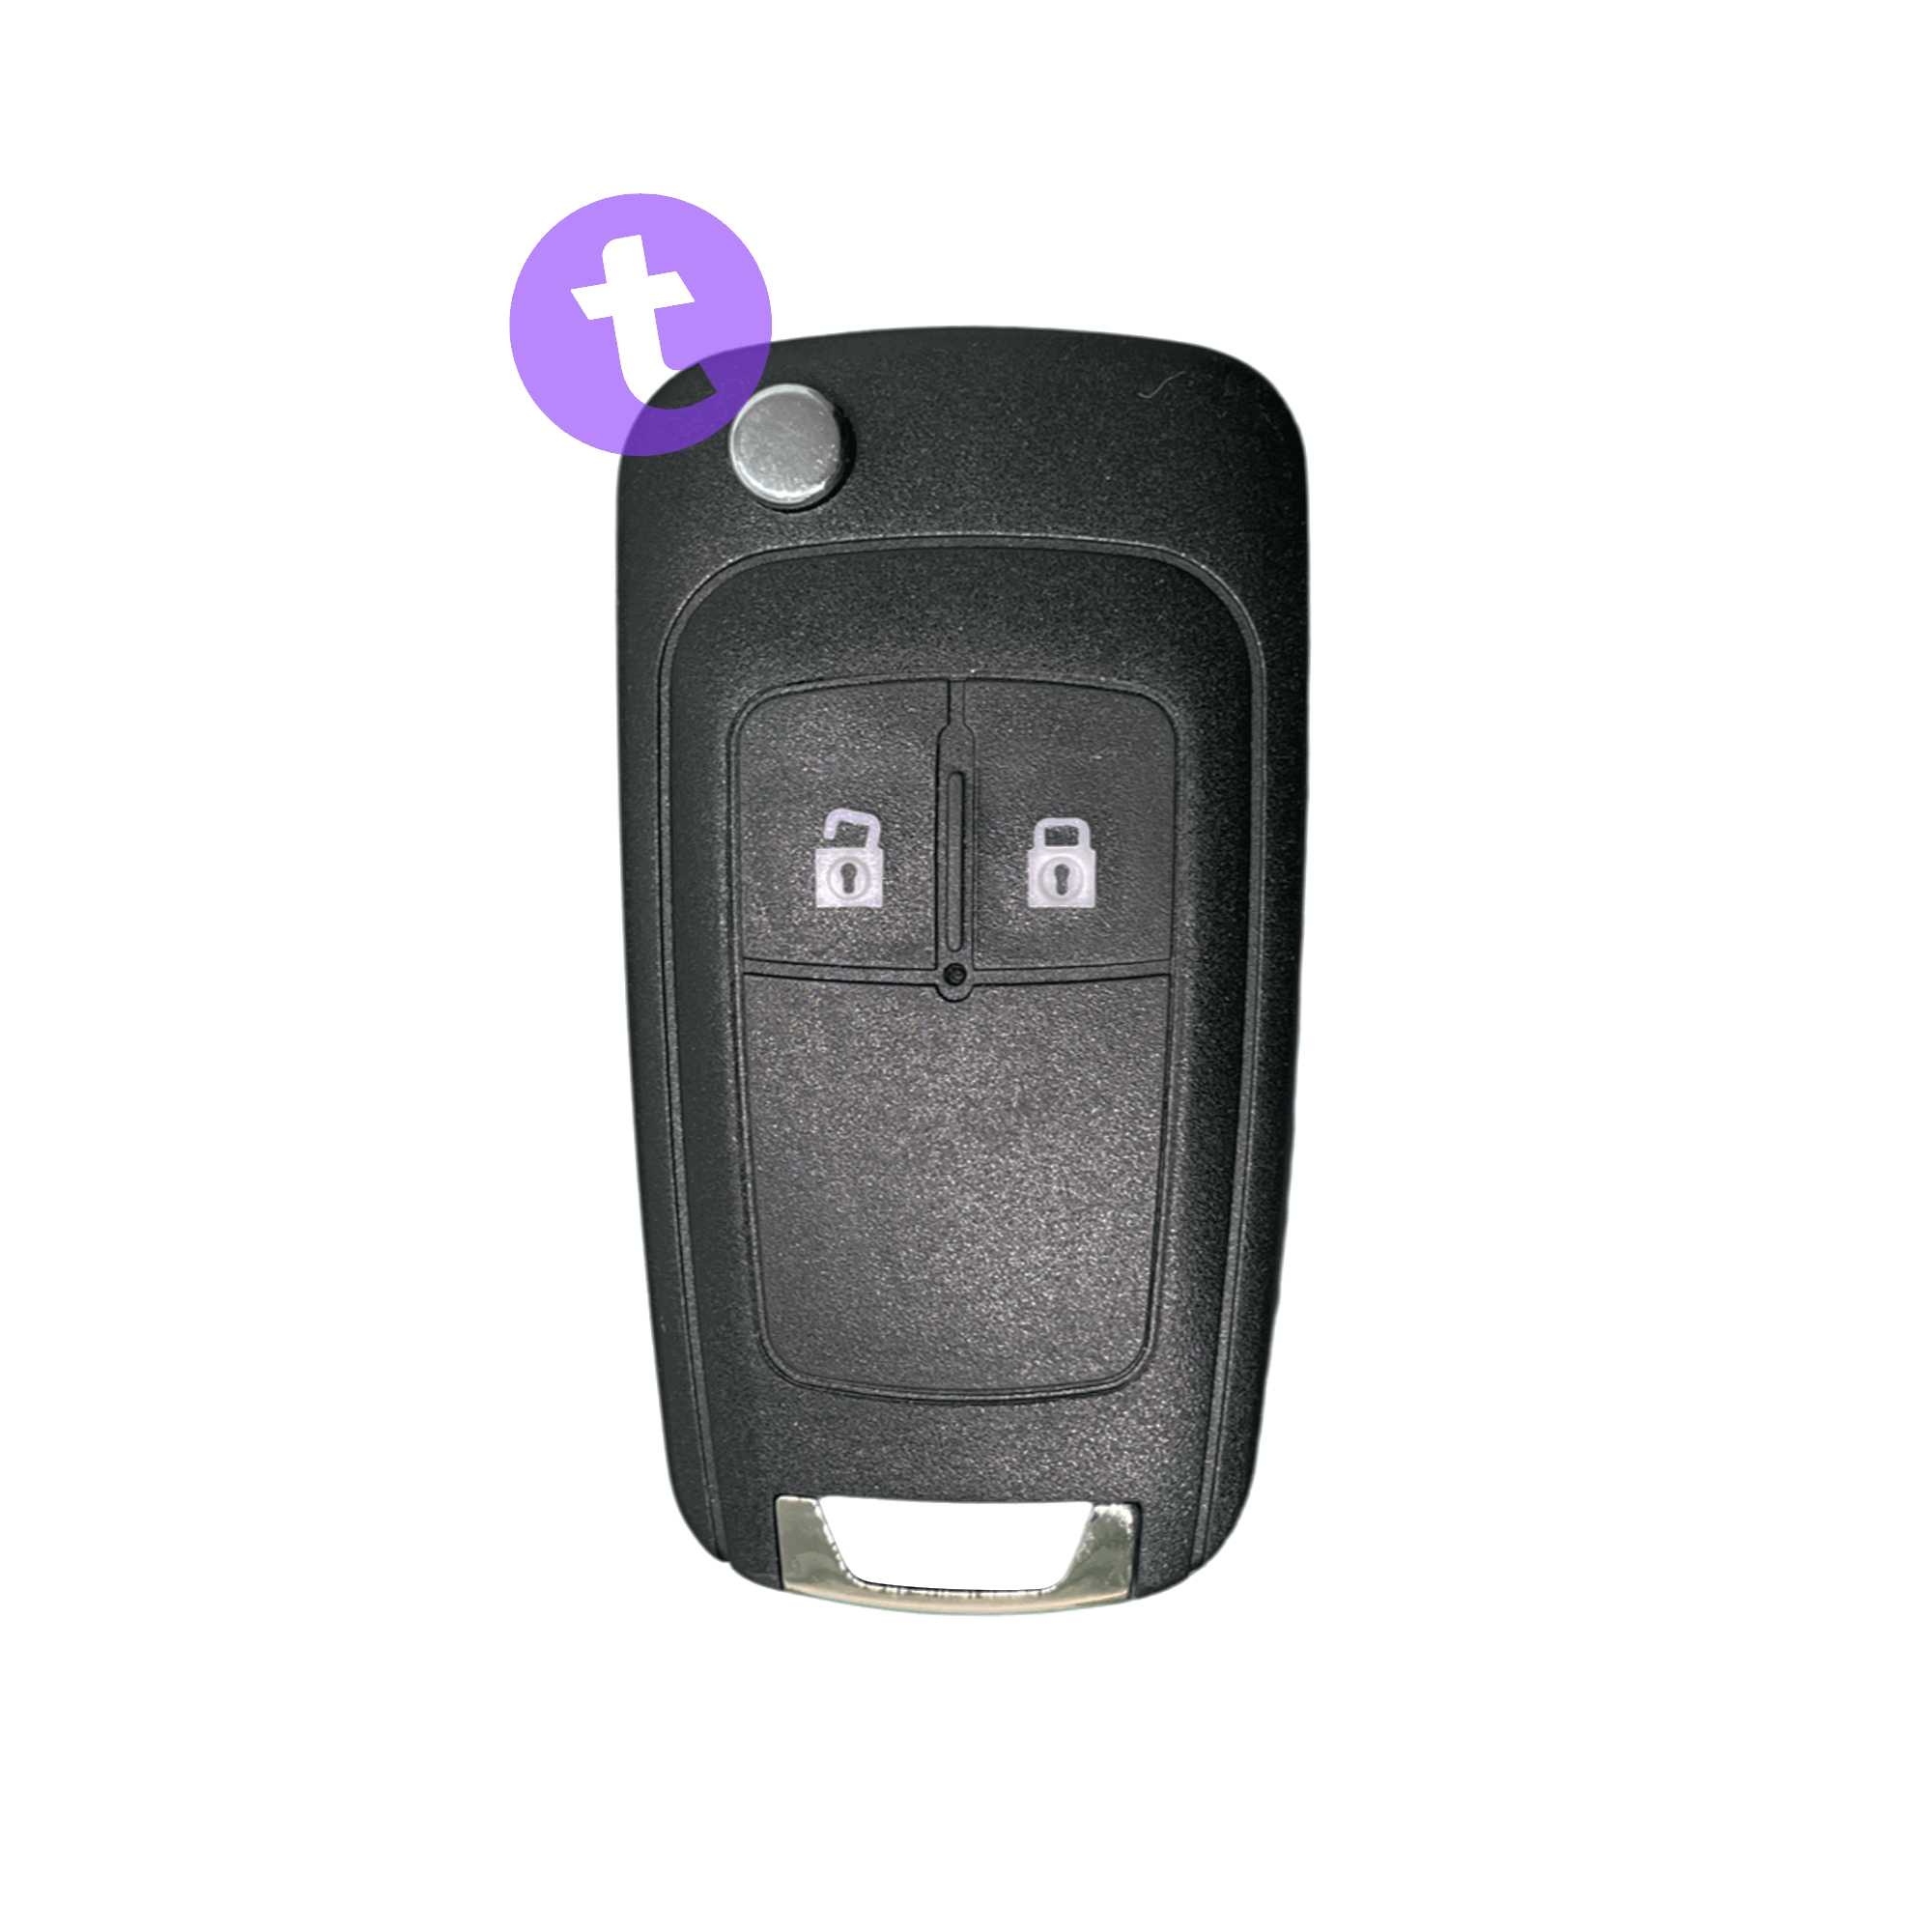 2 Buttons Remote Key for Holden Colorado RG 2012-2017 (P/N: 5WK50079)